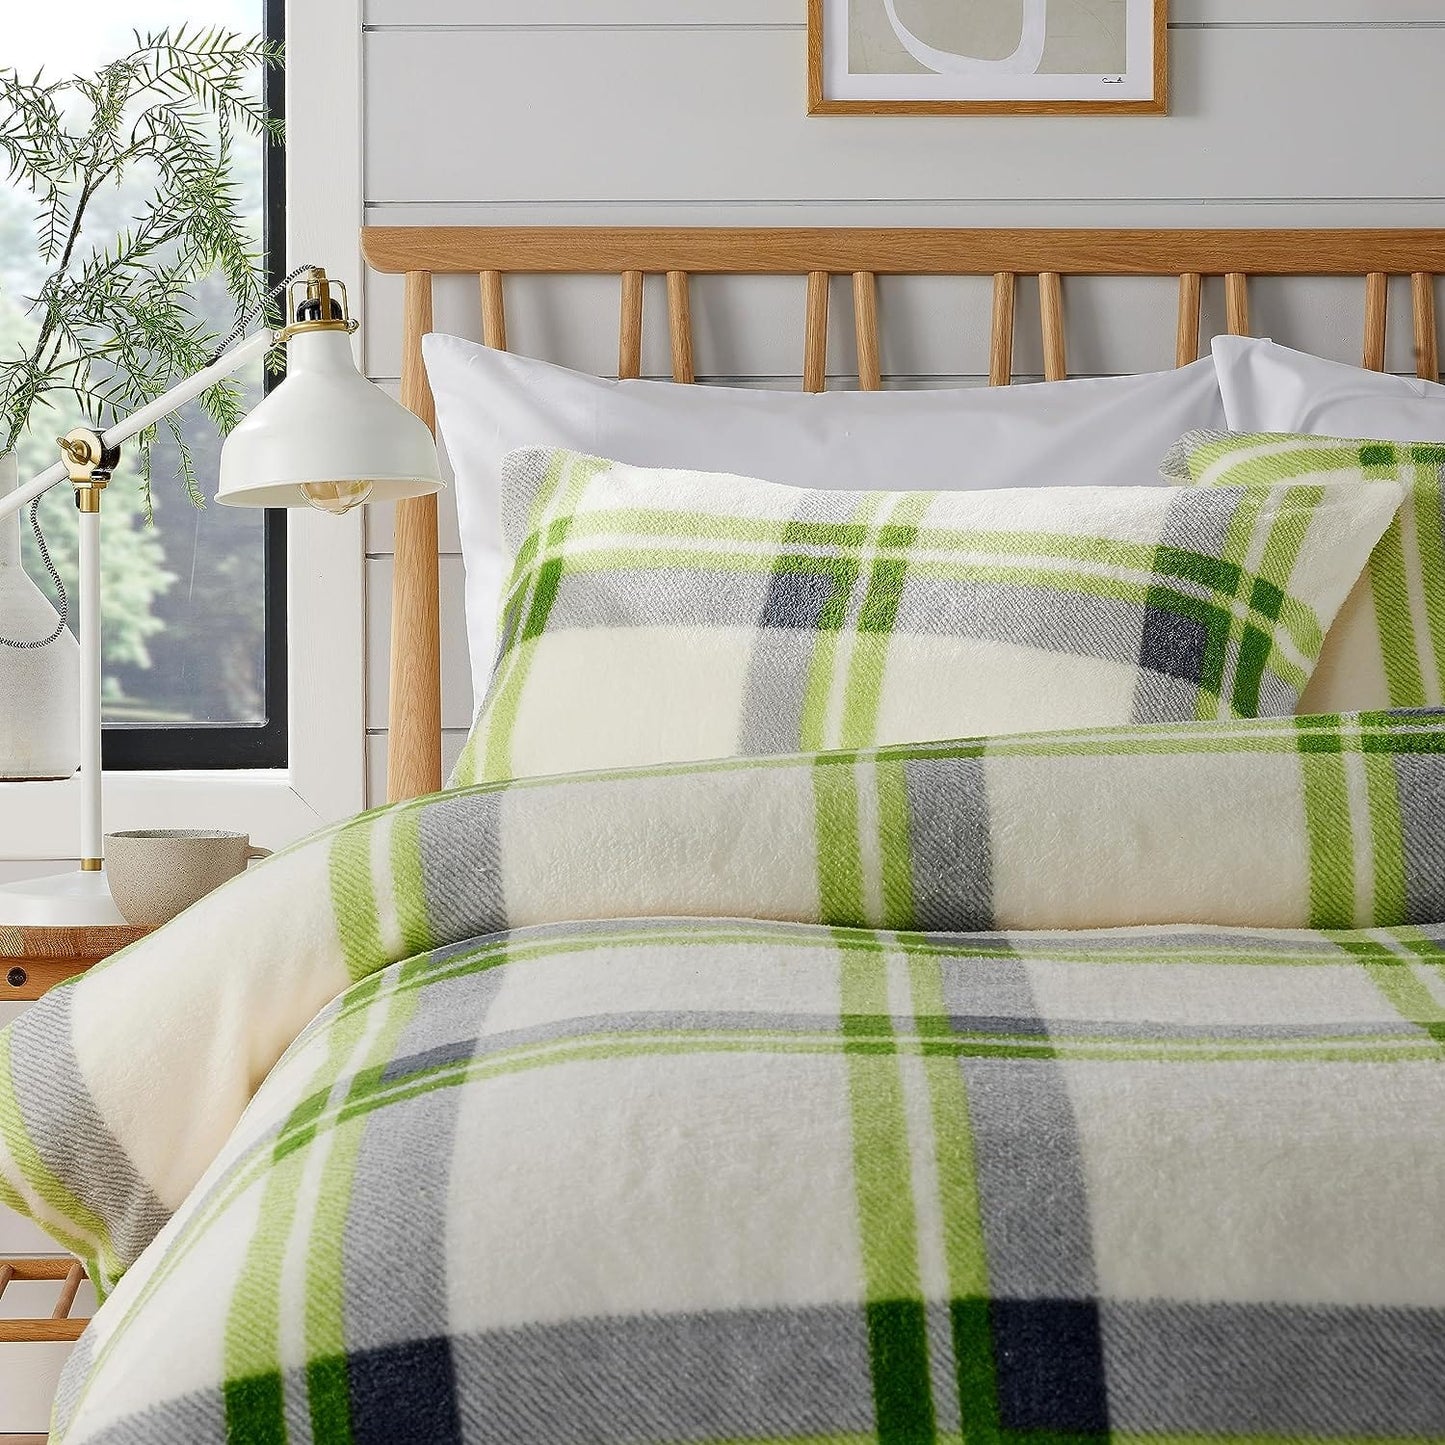 Orkney Check Printed Duvet Sets KING / CHECK GREEN OLIVIA ROCCO Duvet Covers